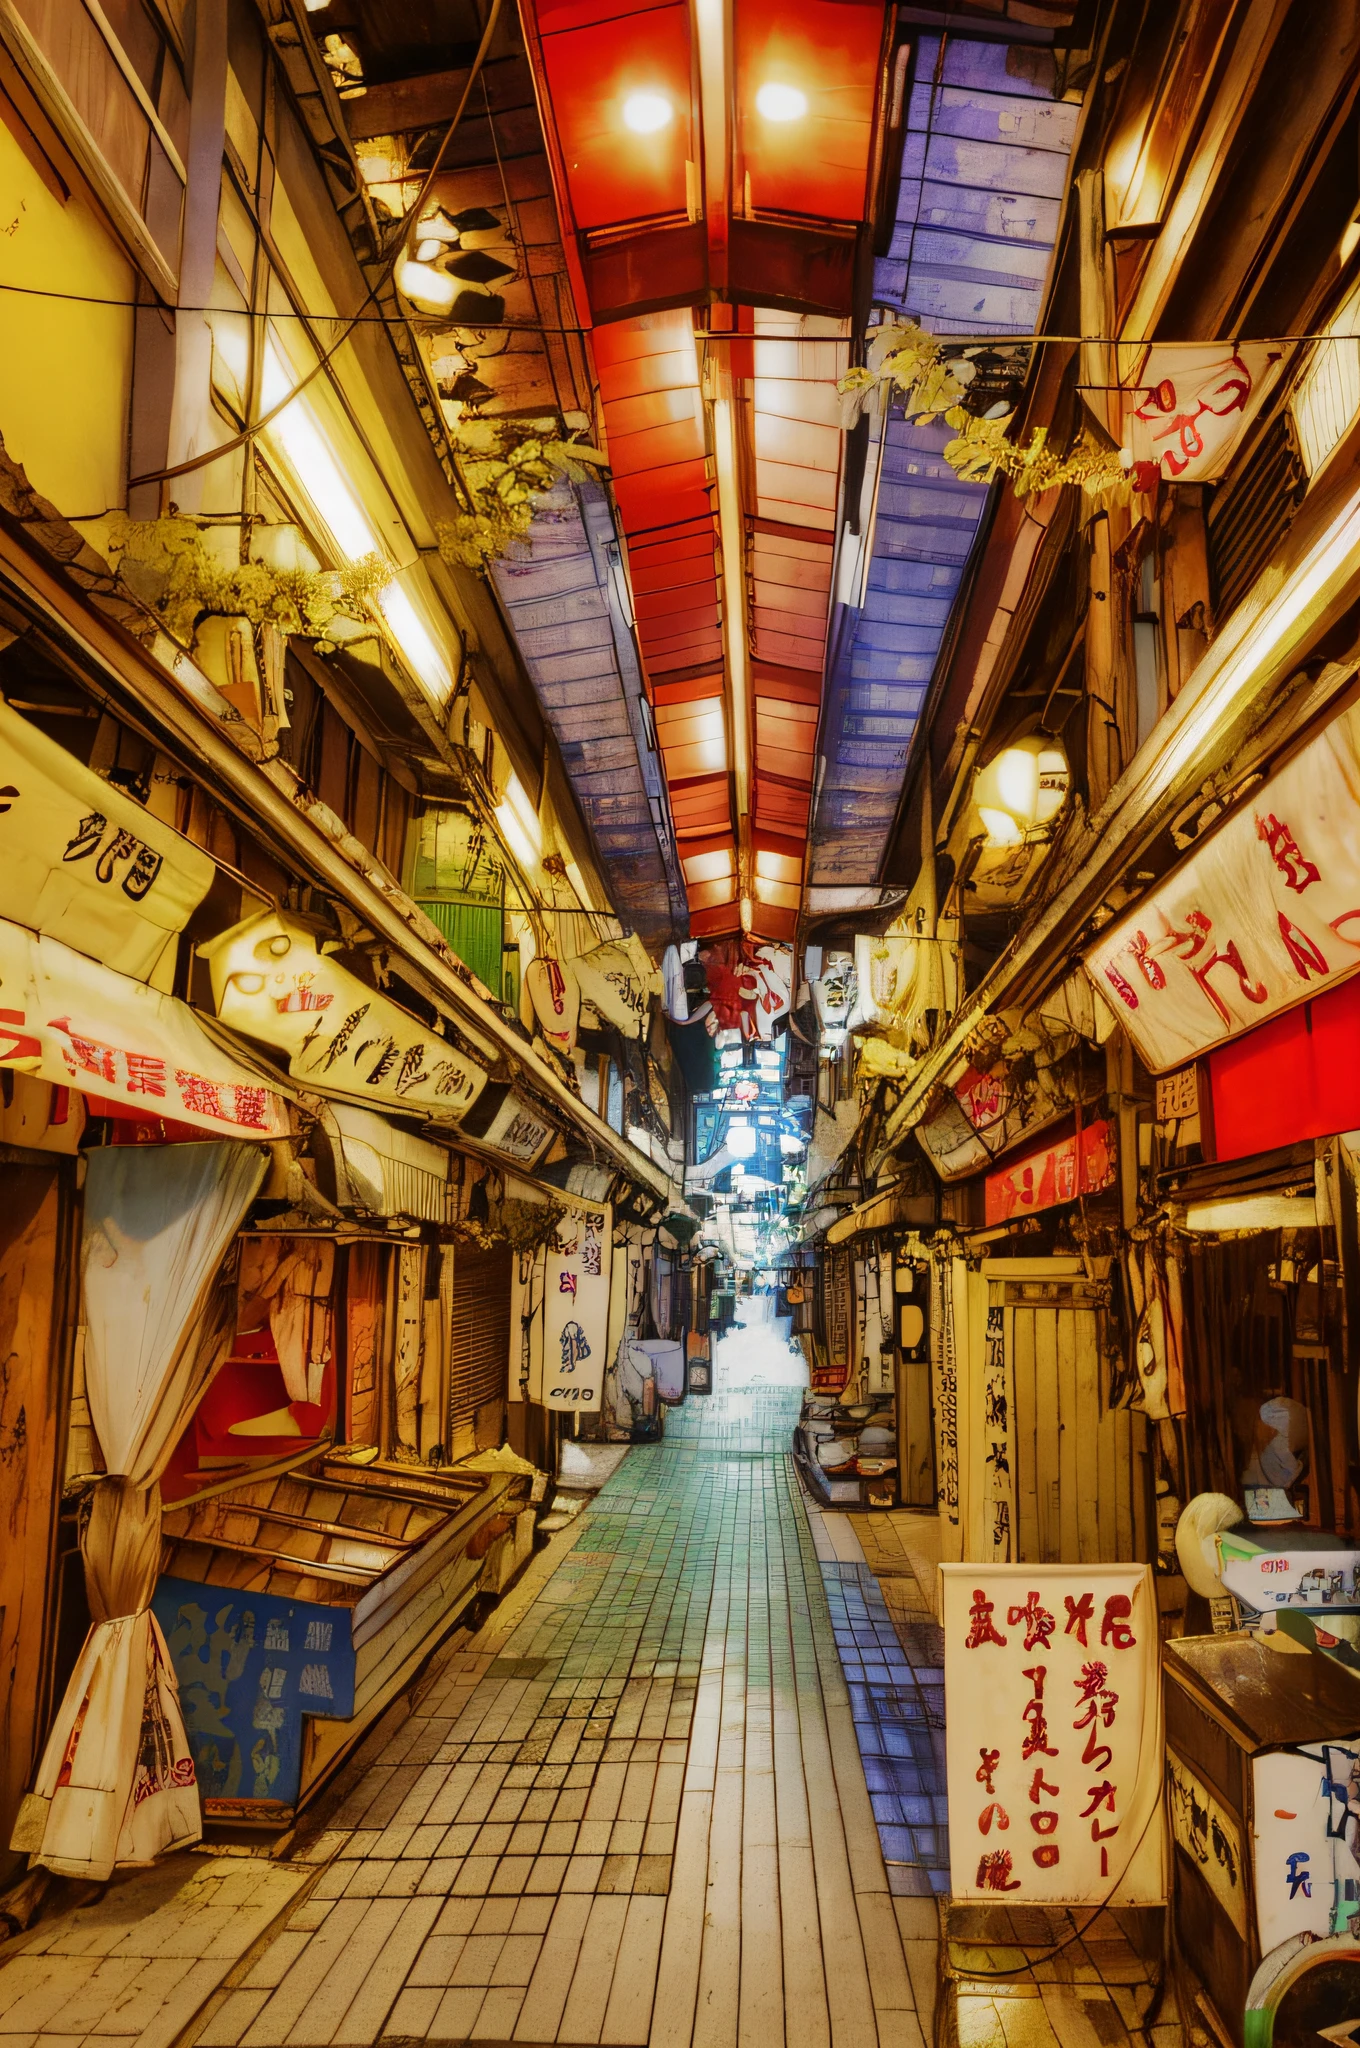 there are many signs hanging from the ceiling in this 市場, old 日本街 市場, 市場 in japan, wet 市場 street, 市場, 荒废的新宿垃圾, 荒废的新宿垃圾 town, 日本沖繩, 東京小巷, the vibrant echoes of the 市場, 日本街, 市場 setting, 日本市中心, fish 市場 stalls, 薩基米昌人類發展研究所